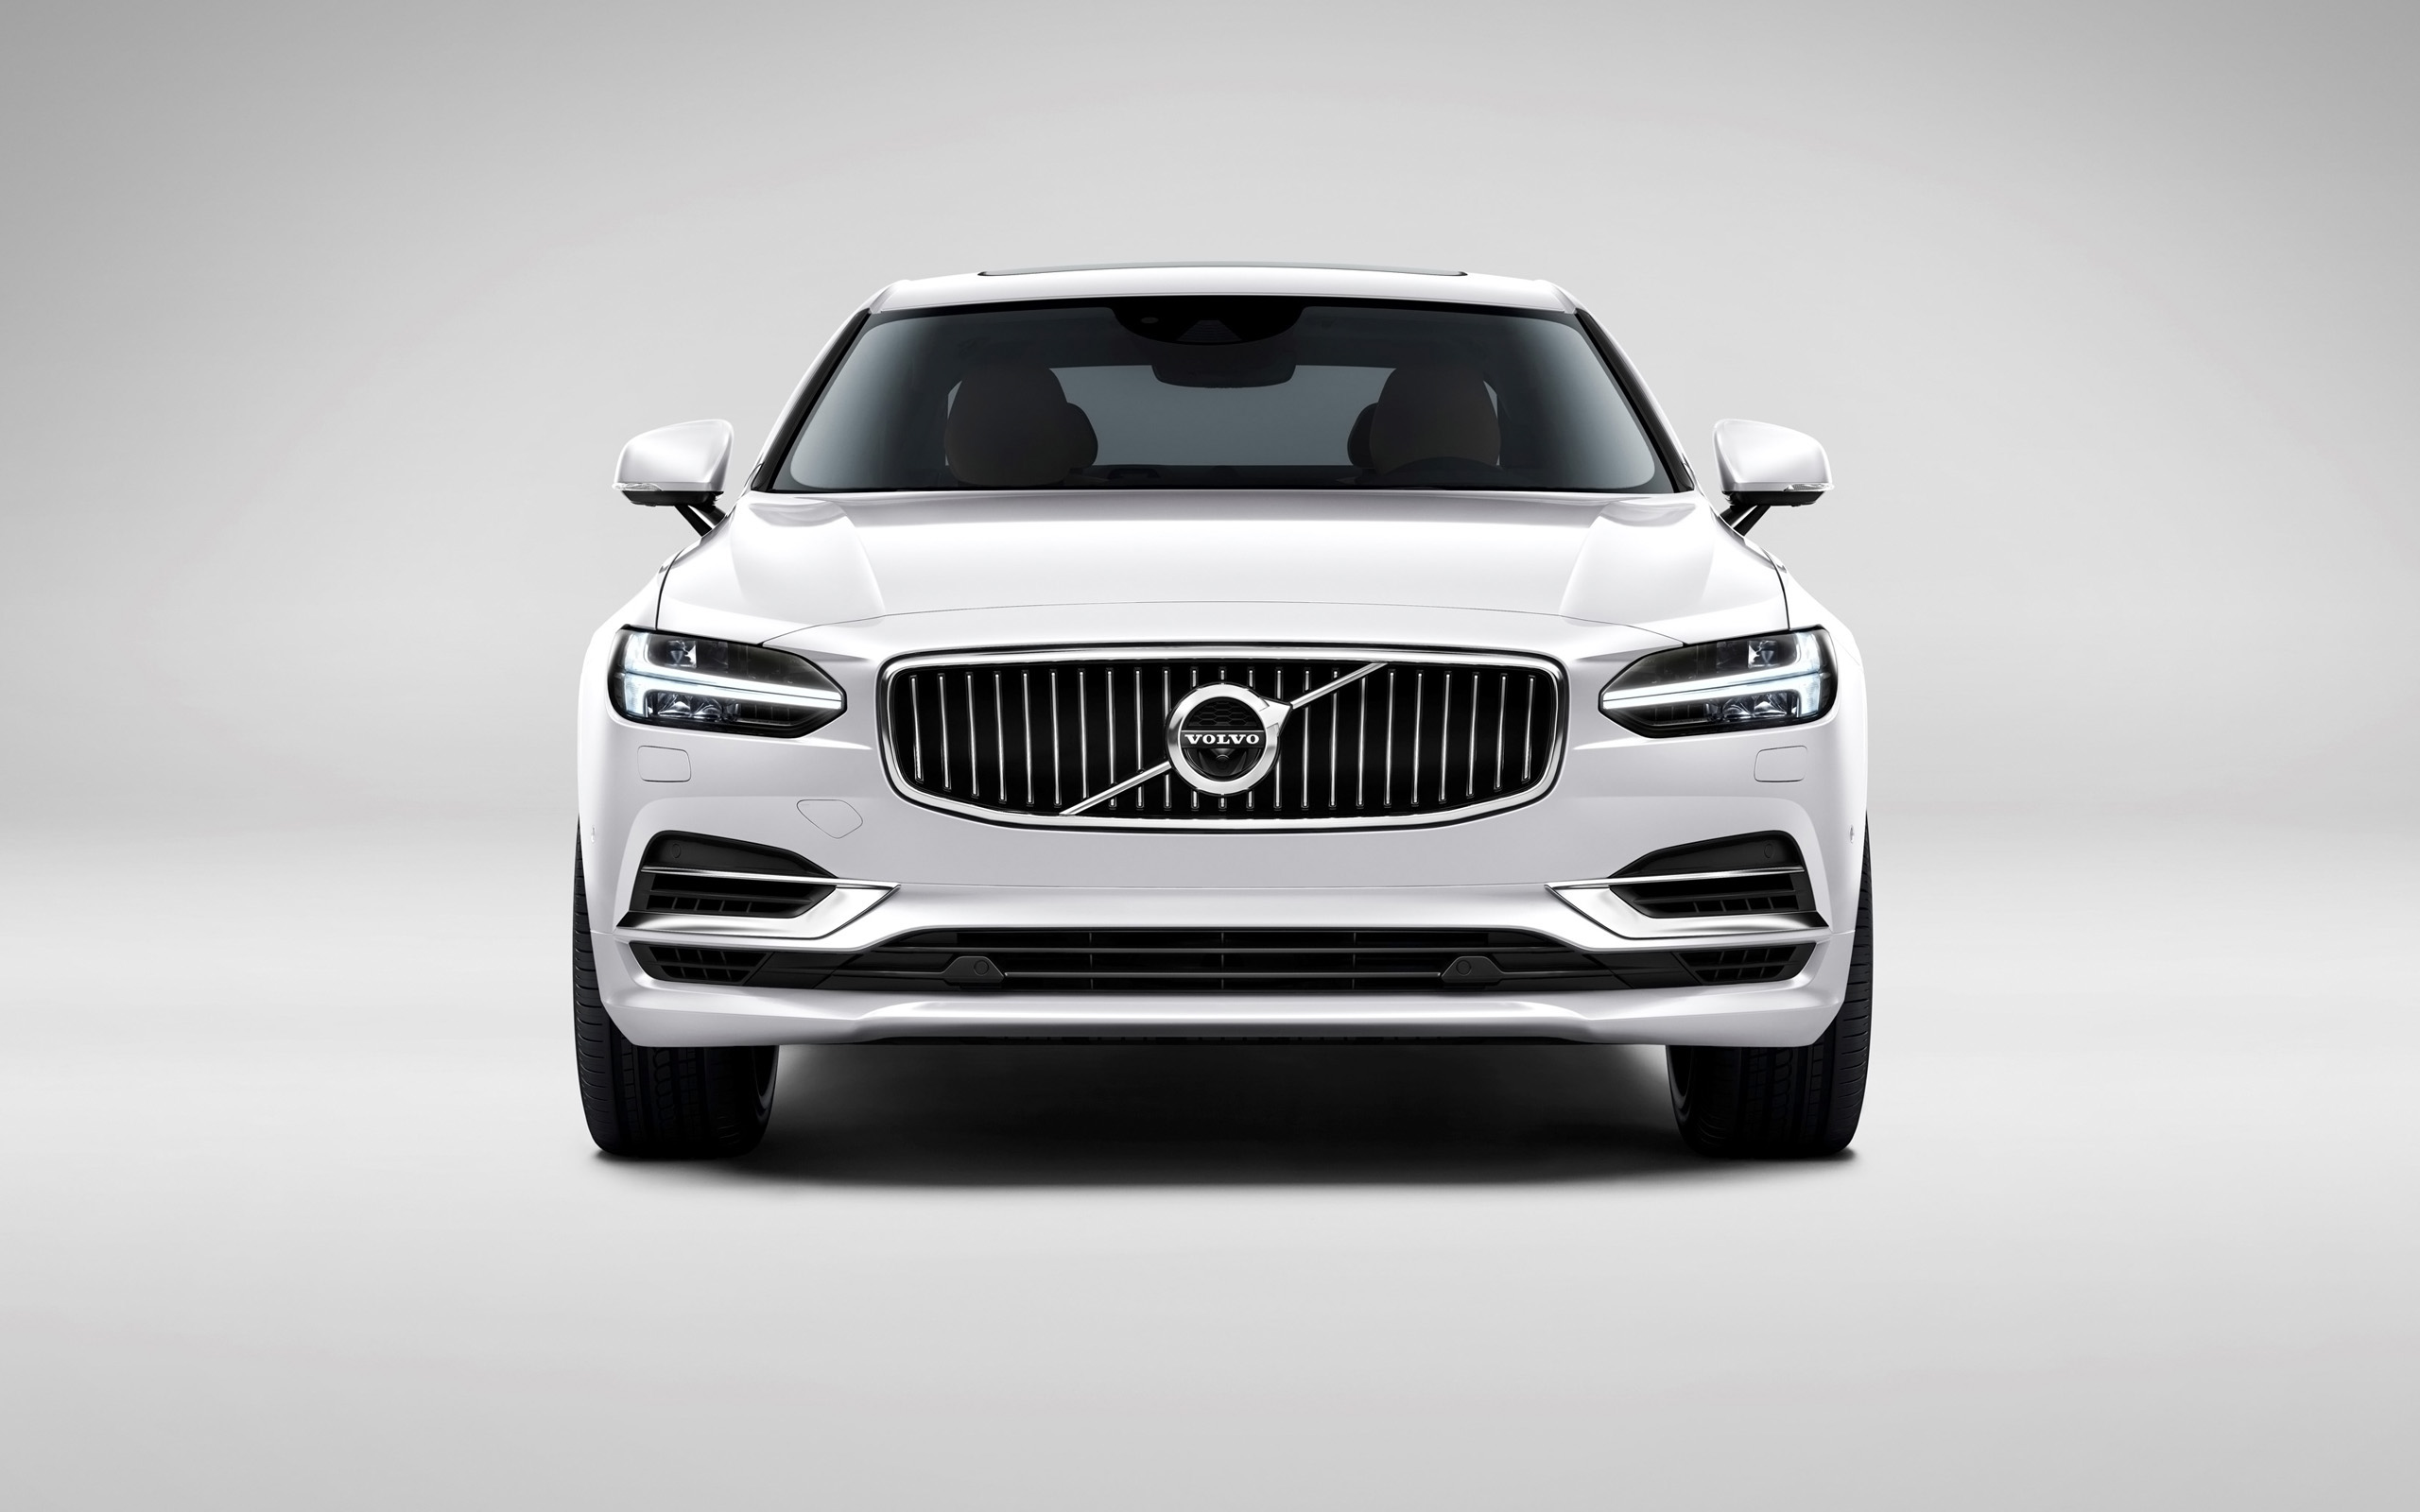 Vehicles Volvo S90 HD Wallpaper | Background Image